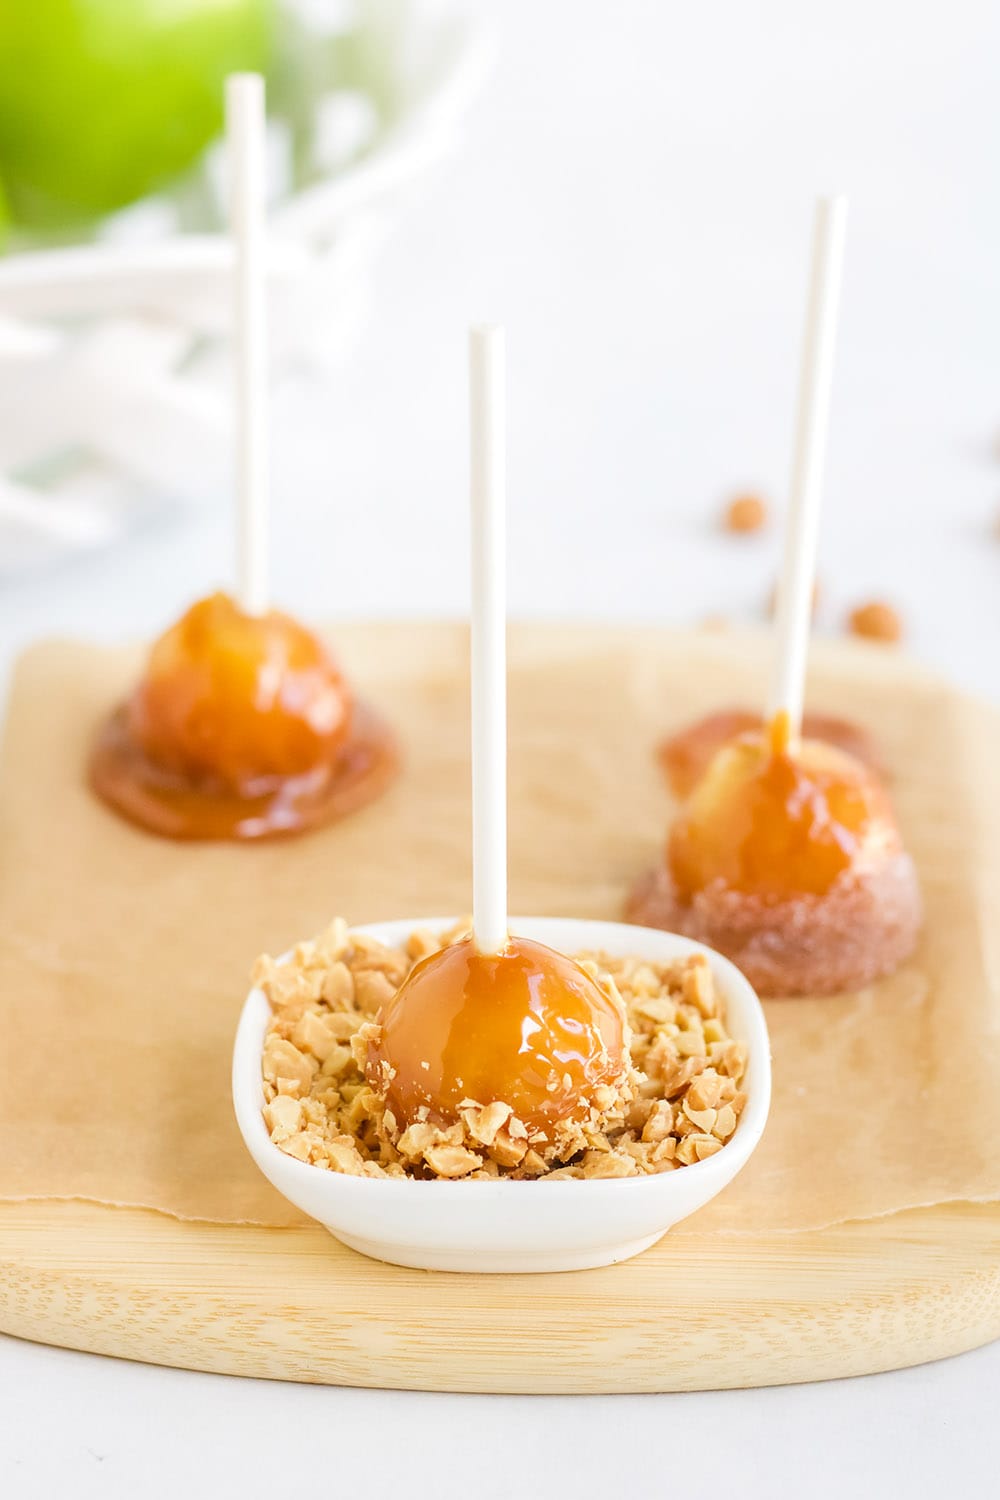 dipping caramel apple into nuts